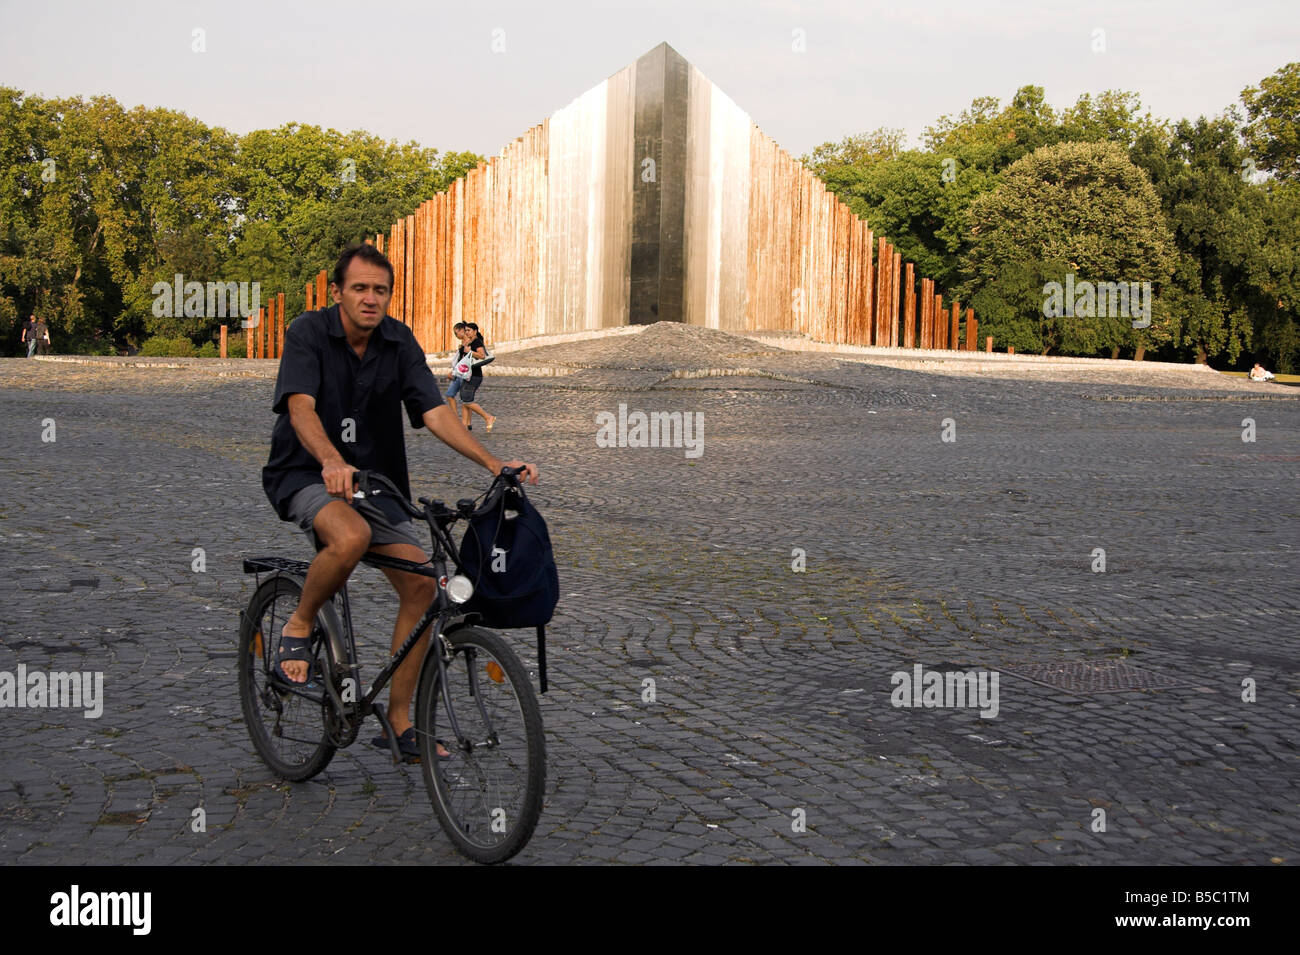 Man on a bicycle, Monument to 1956 Hungarian Revolution, Pest, Budapest, Hungary Stock Photo